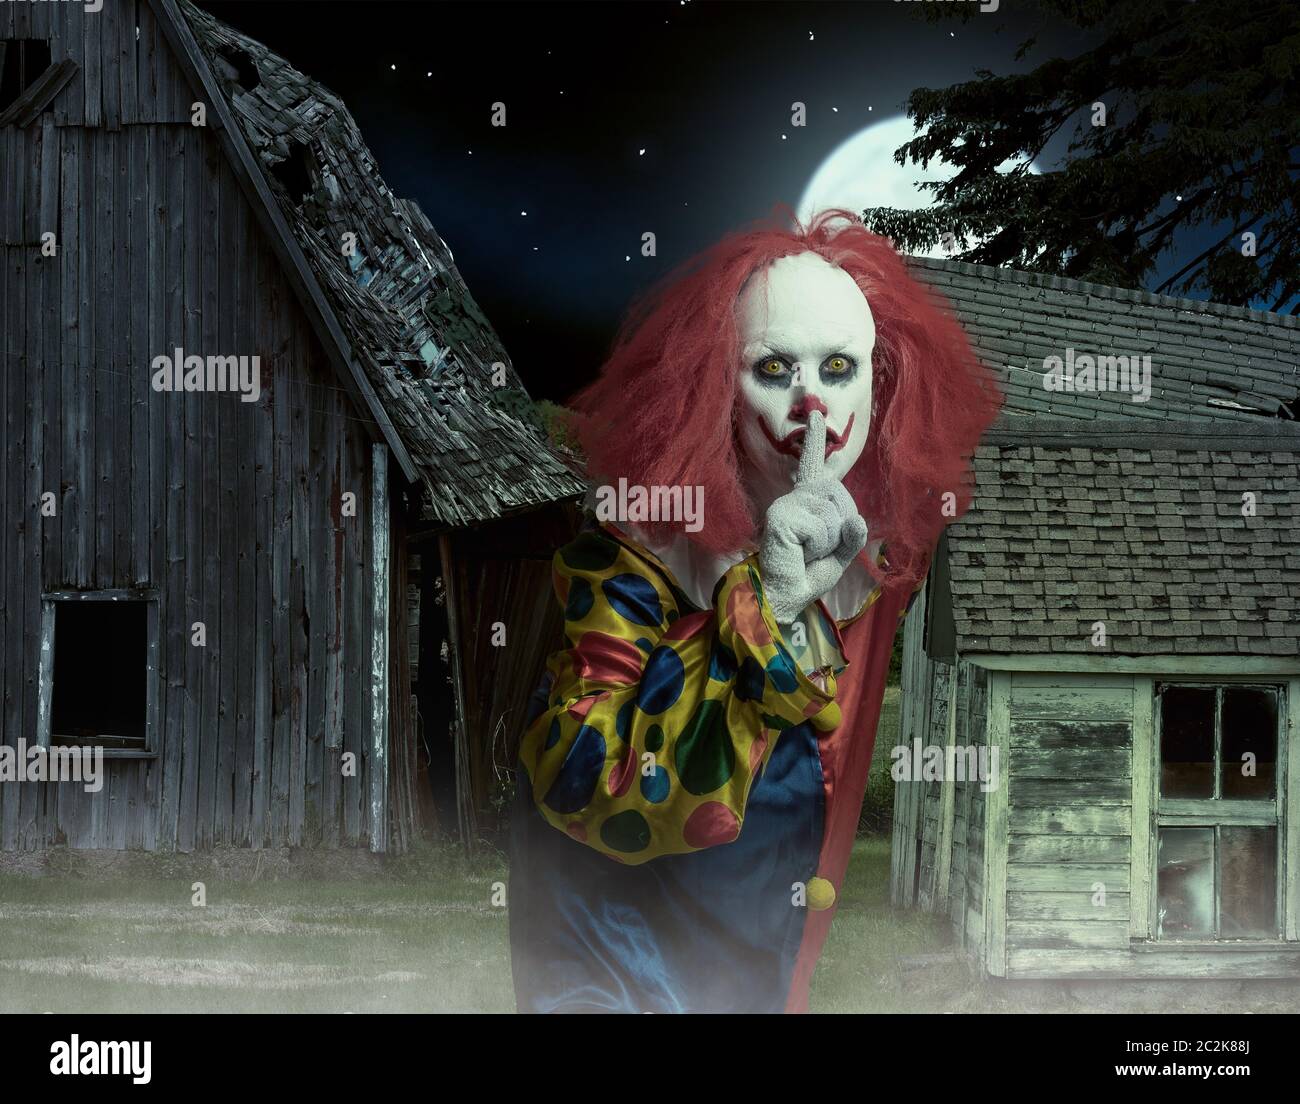 eerie clown with finger on mouth in front of a scary scene Stock Photo